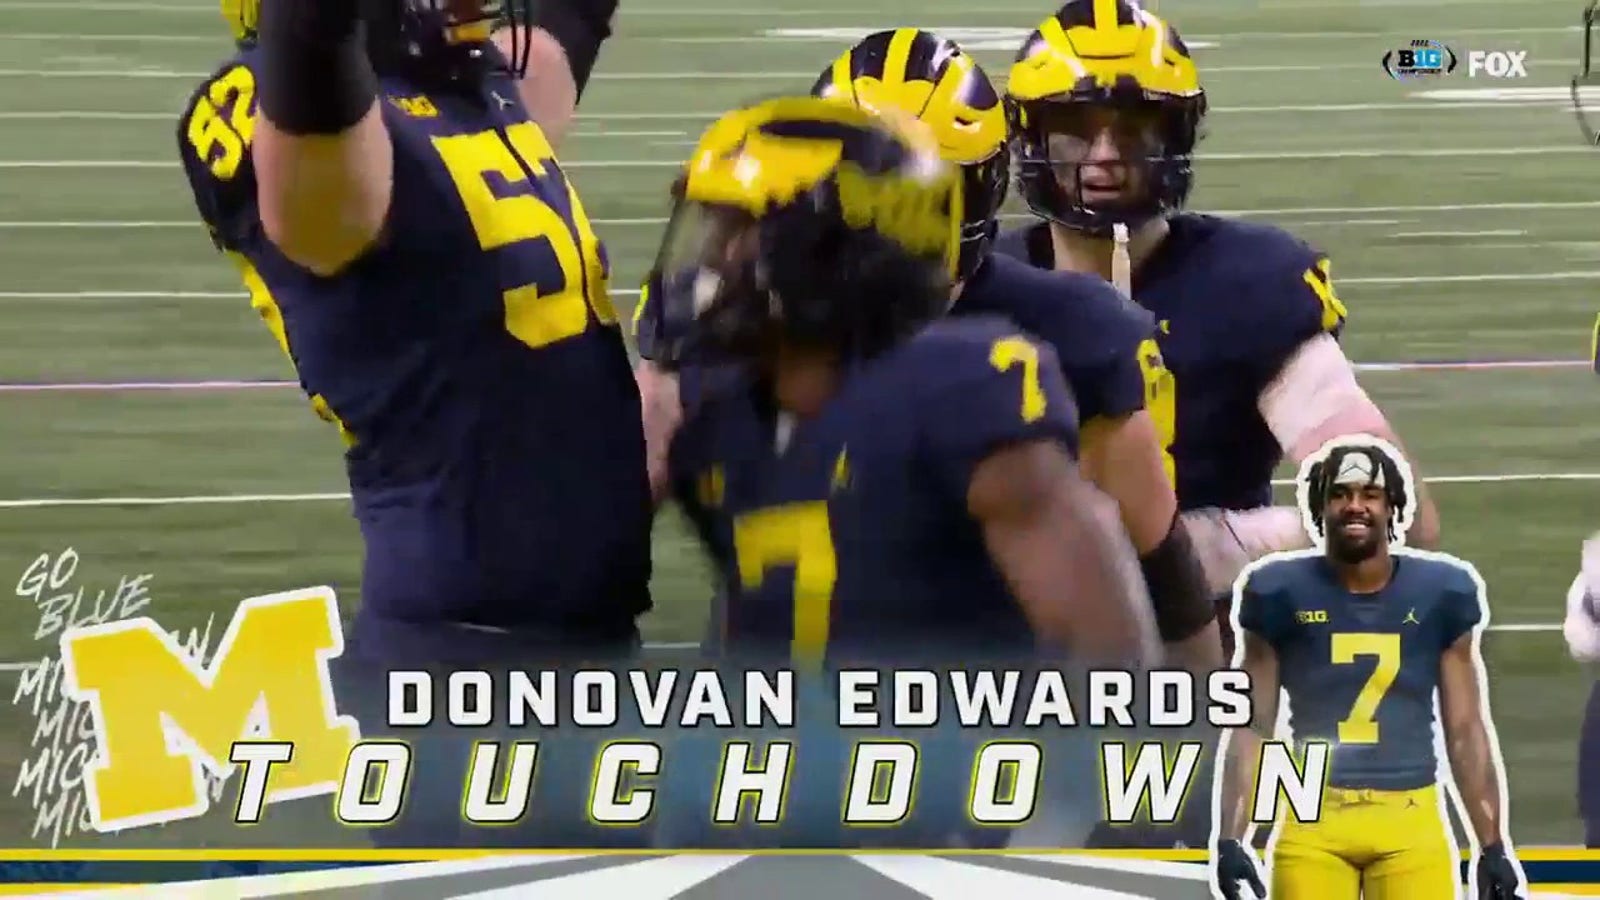 Donovan Edwards' 27-yard TD run extends the lead to 28-13